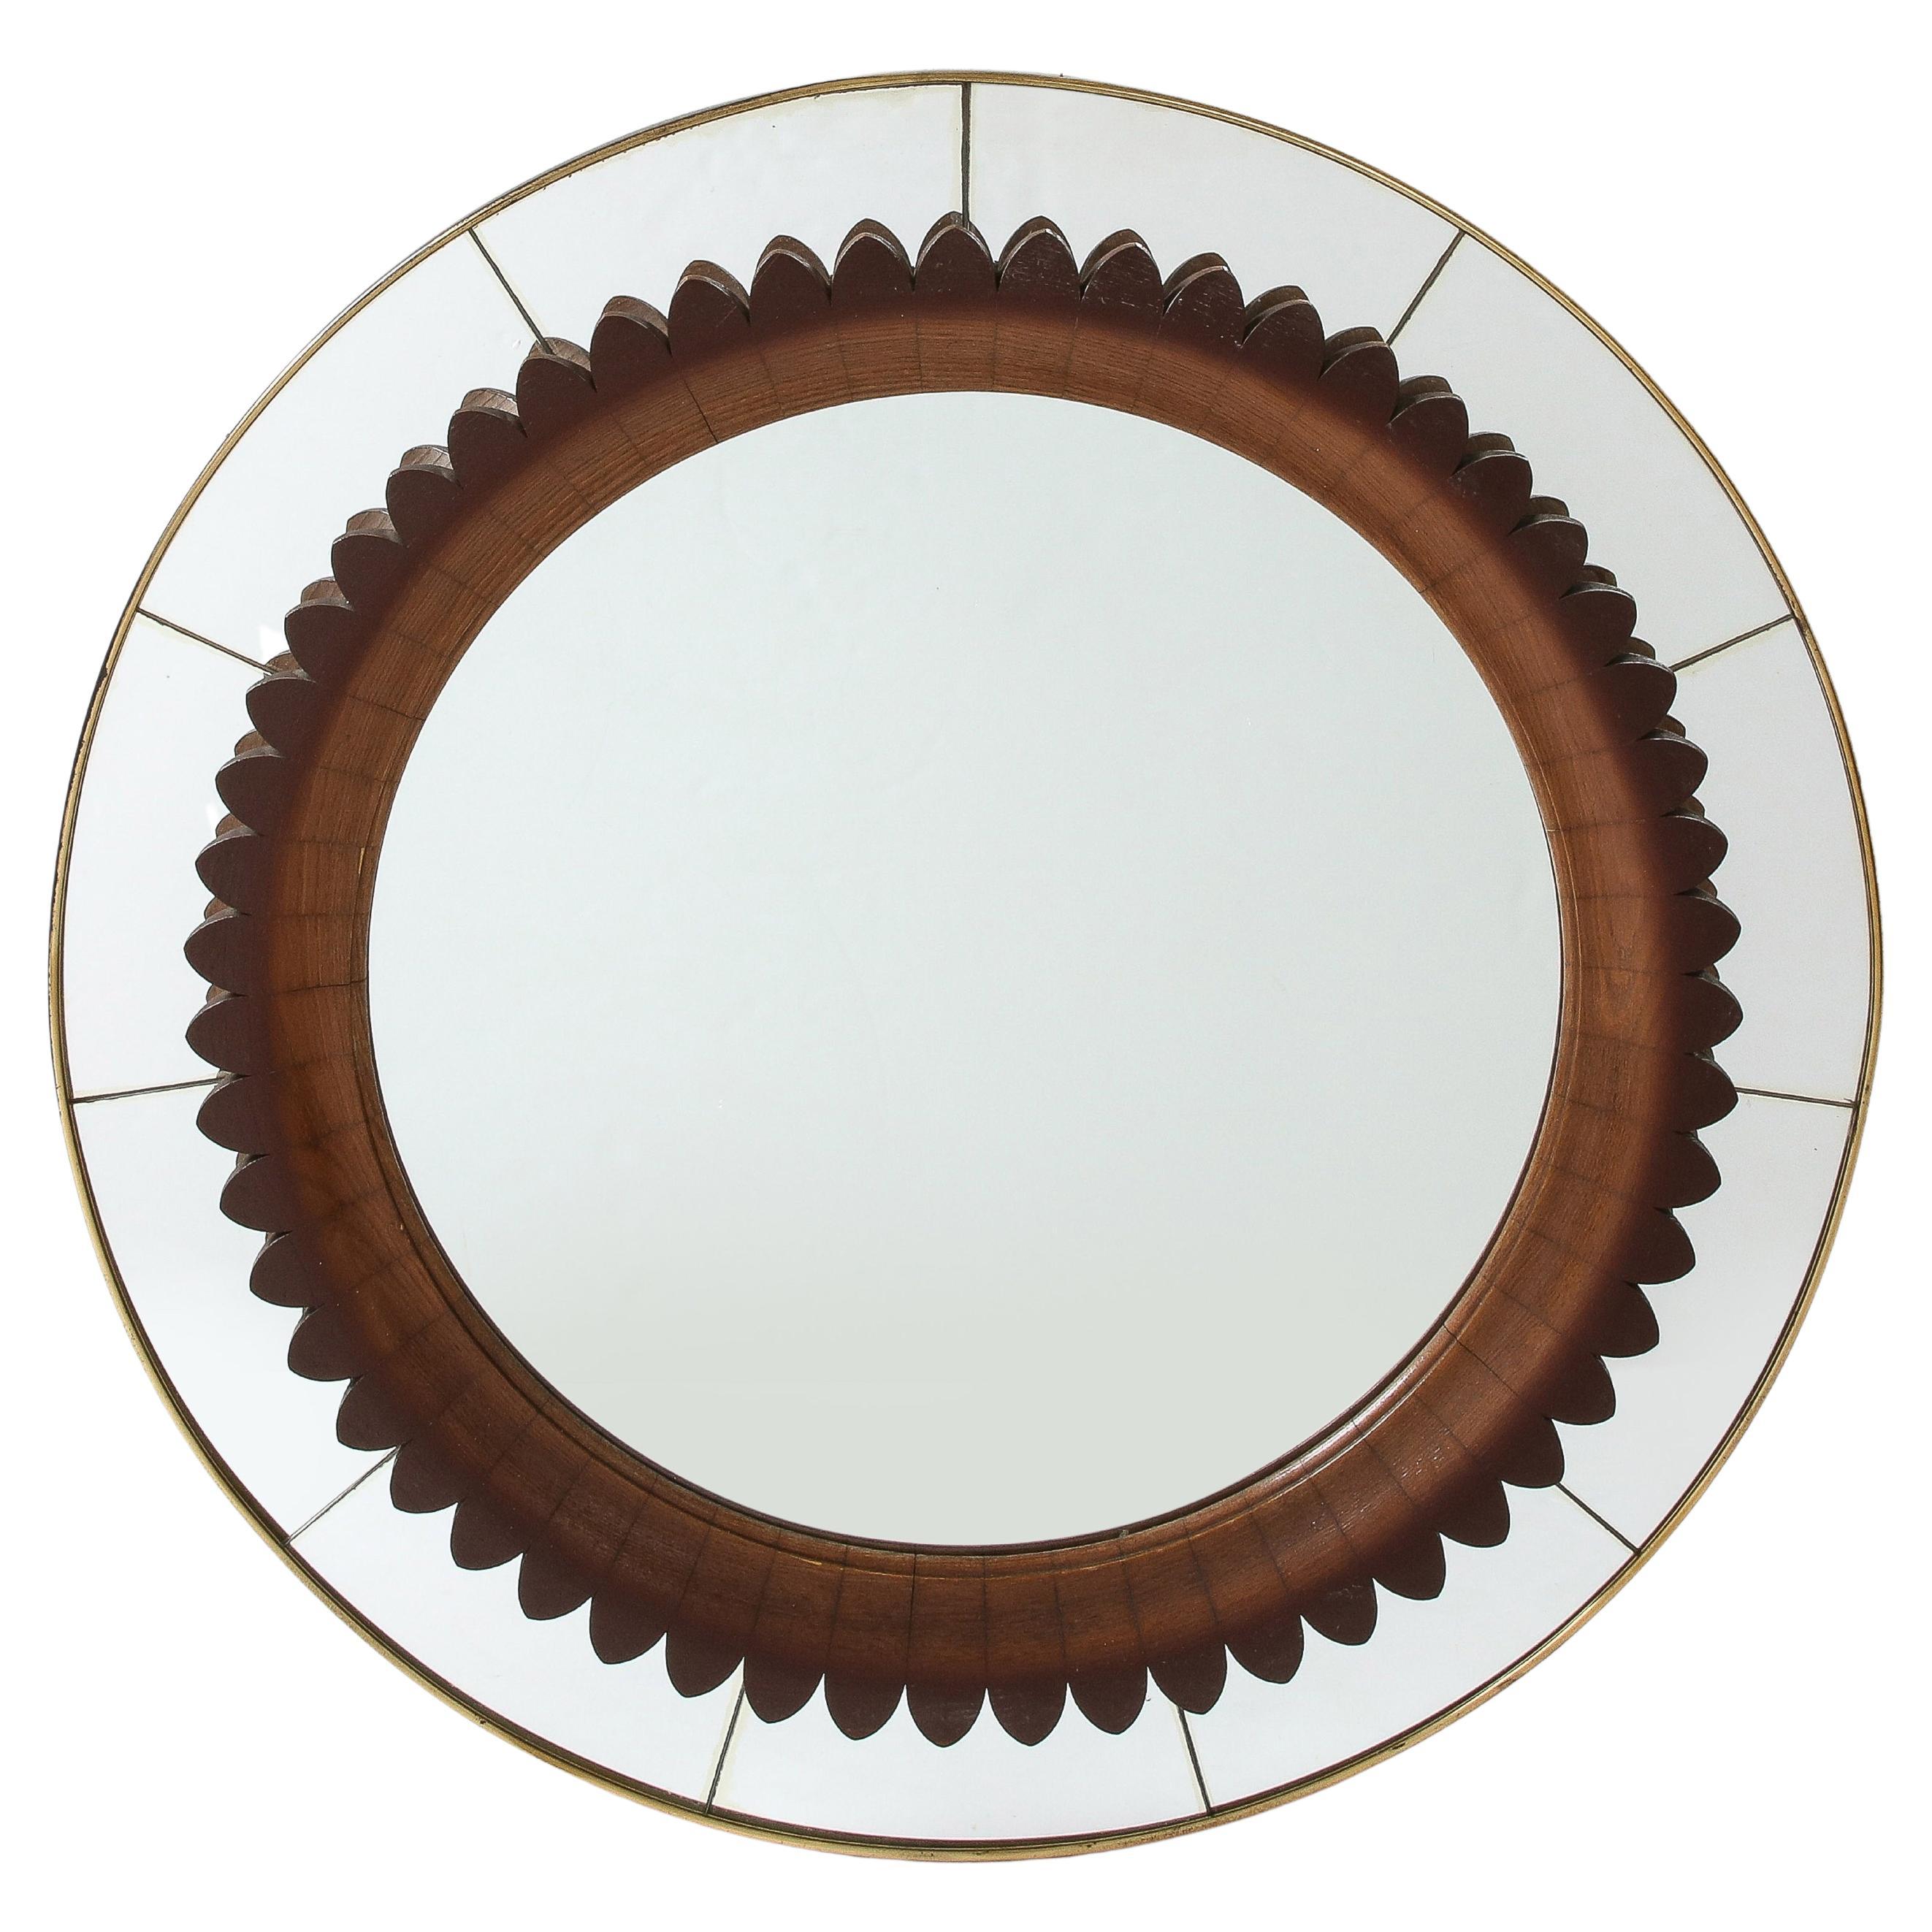 Fratelli Marelli Rare Round Carved Walnut and Brass Wall Mirror, Italy, 1950s